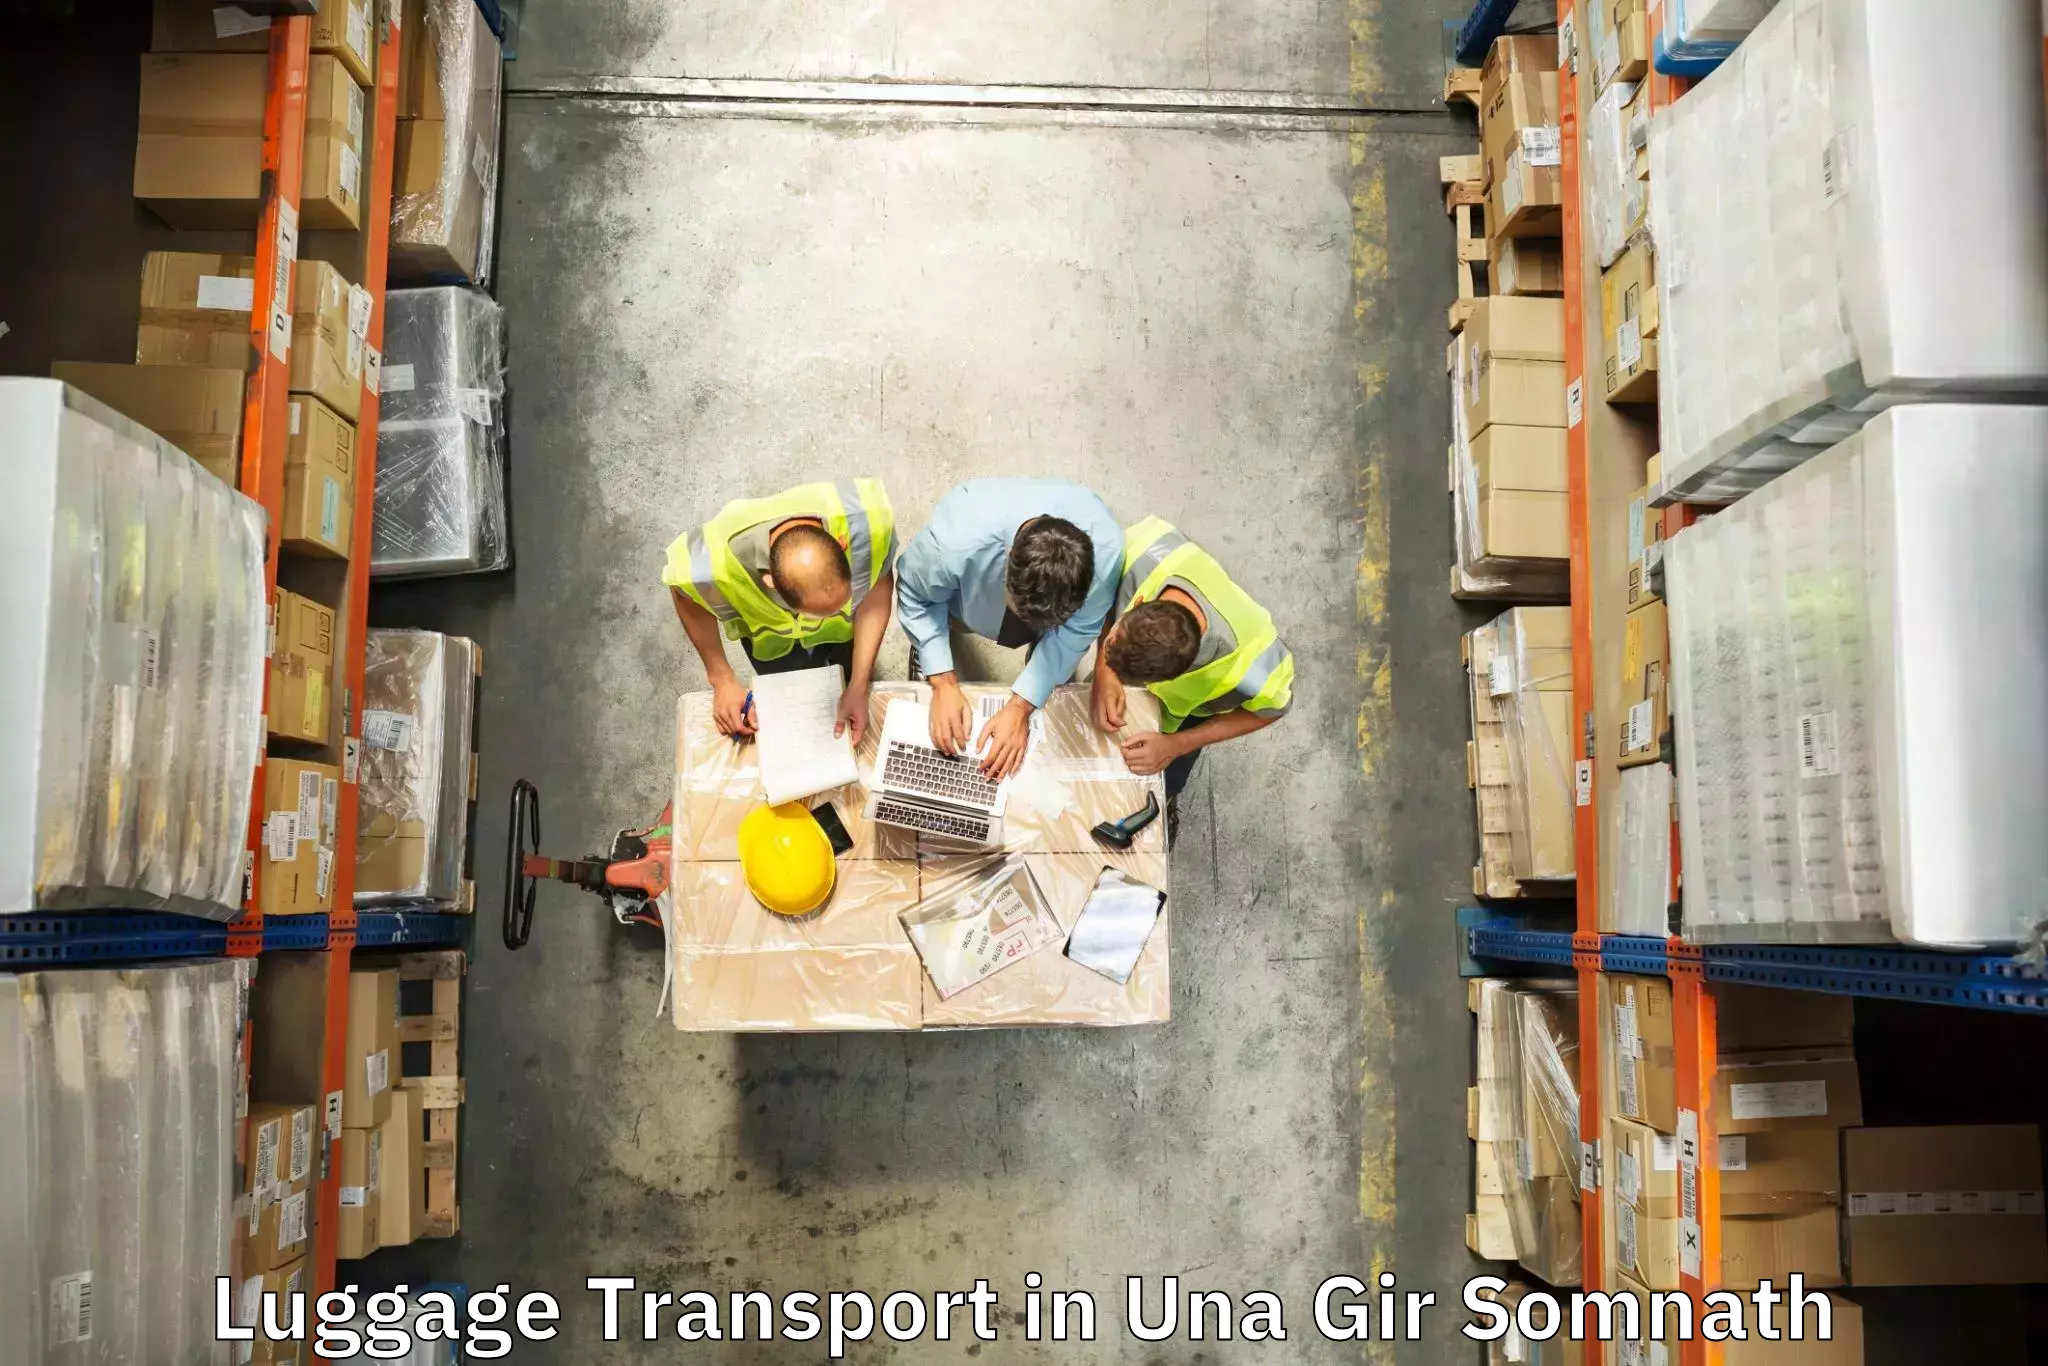 Baggage delivery technology in Una Gir Somnath